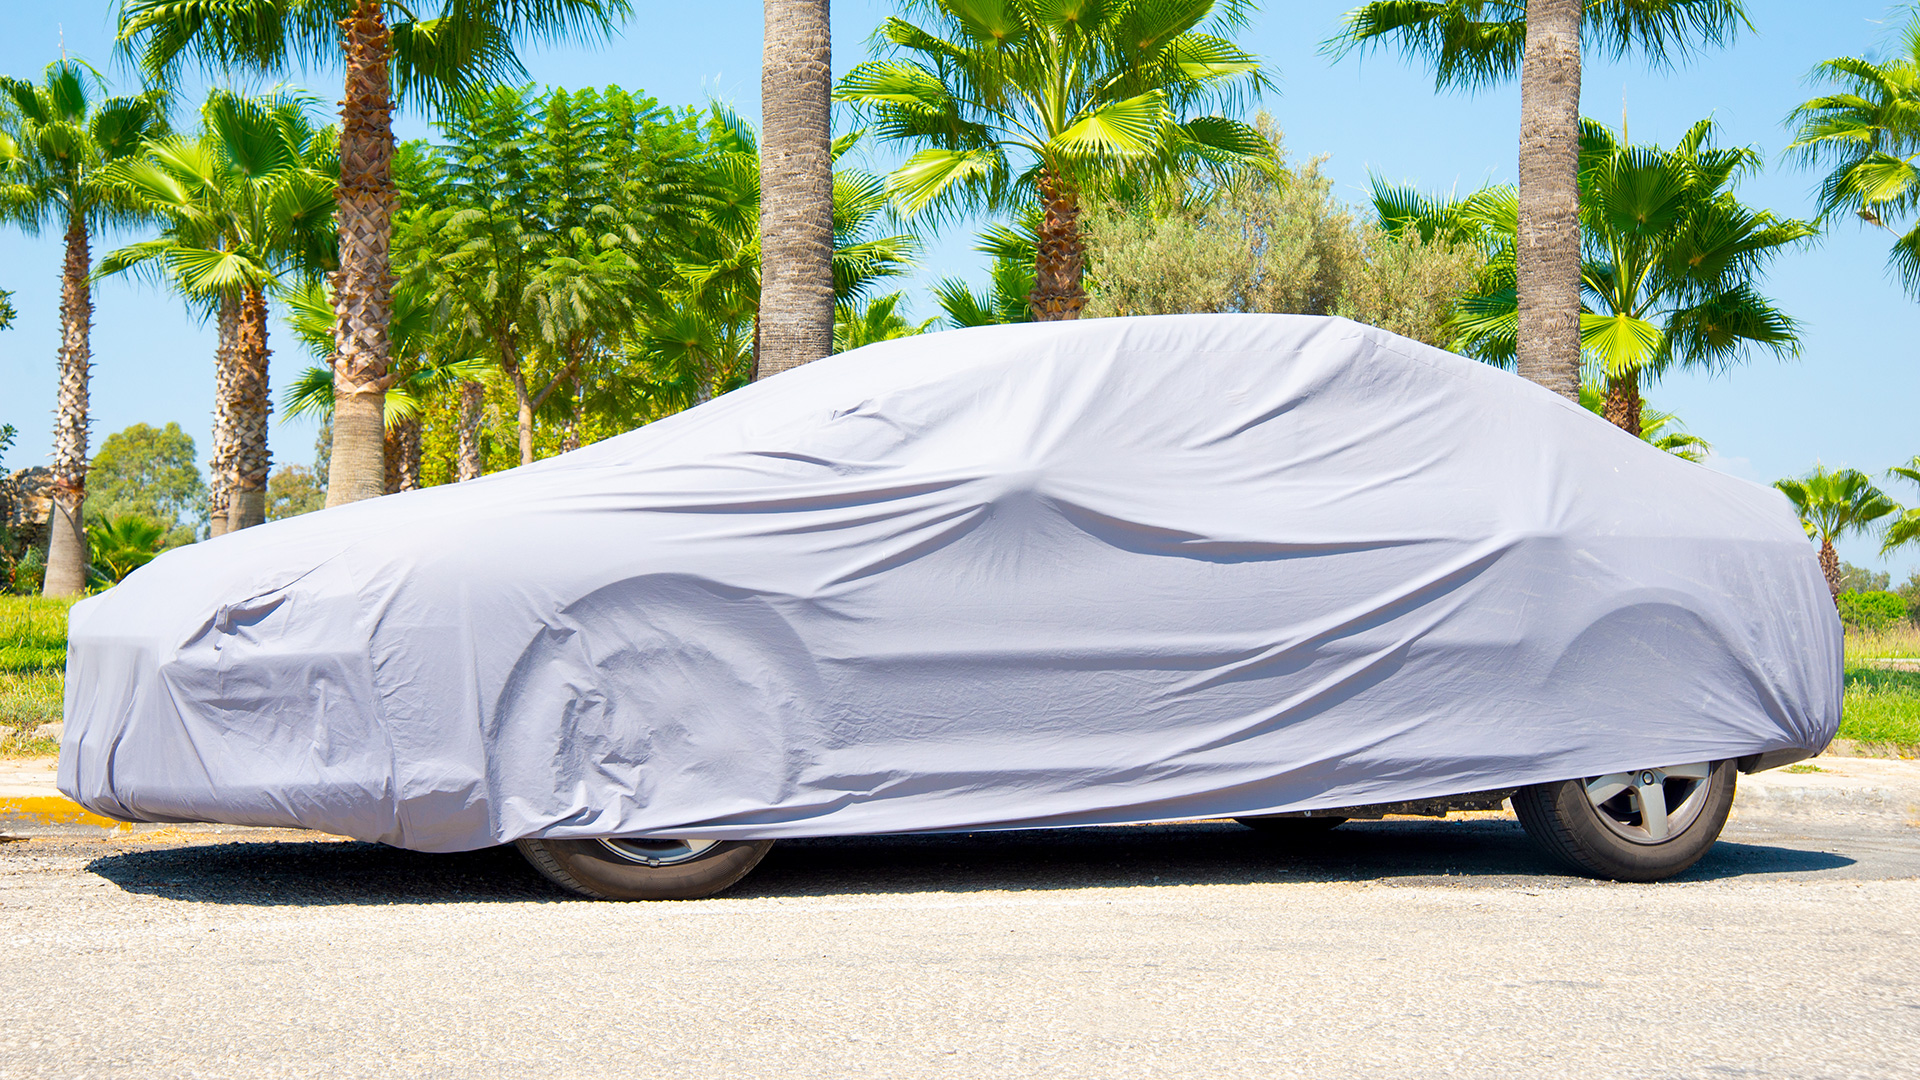 https://evpulsecms.com/wp-content/uploads/2022/06/the-best-car-covers-to-keep-your-ev-protected.jpg